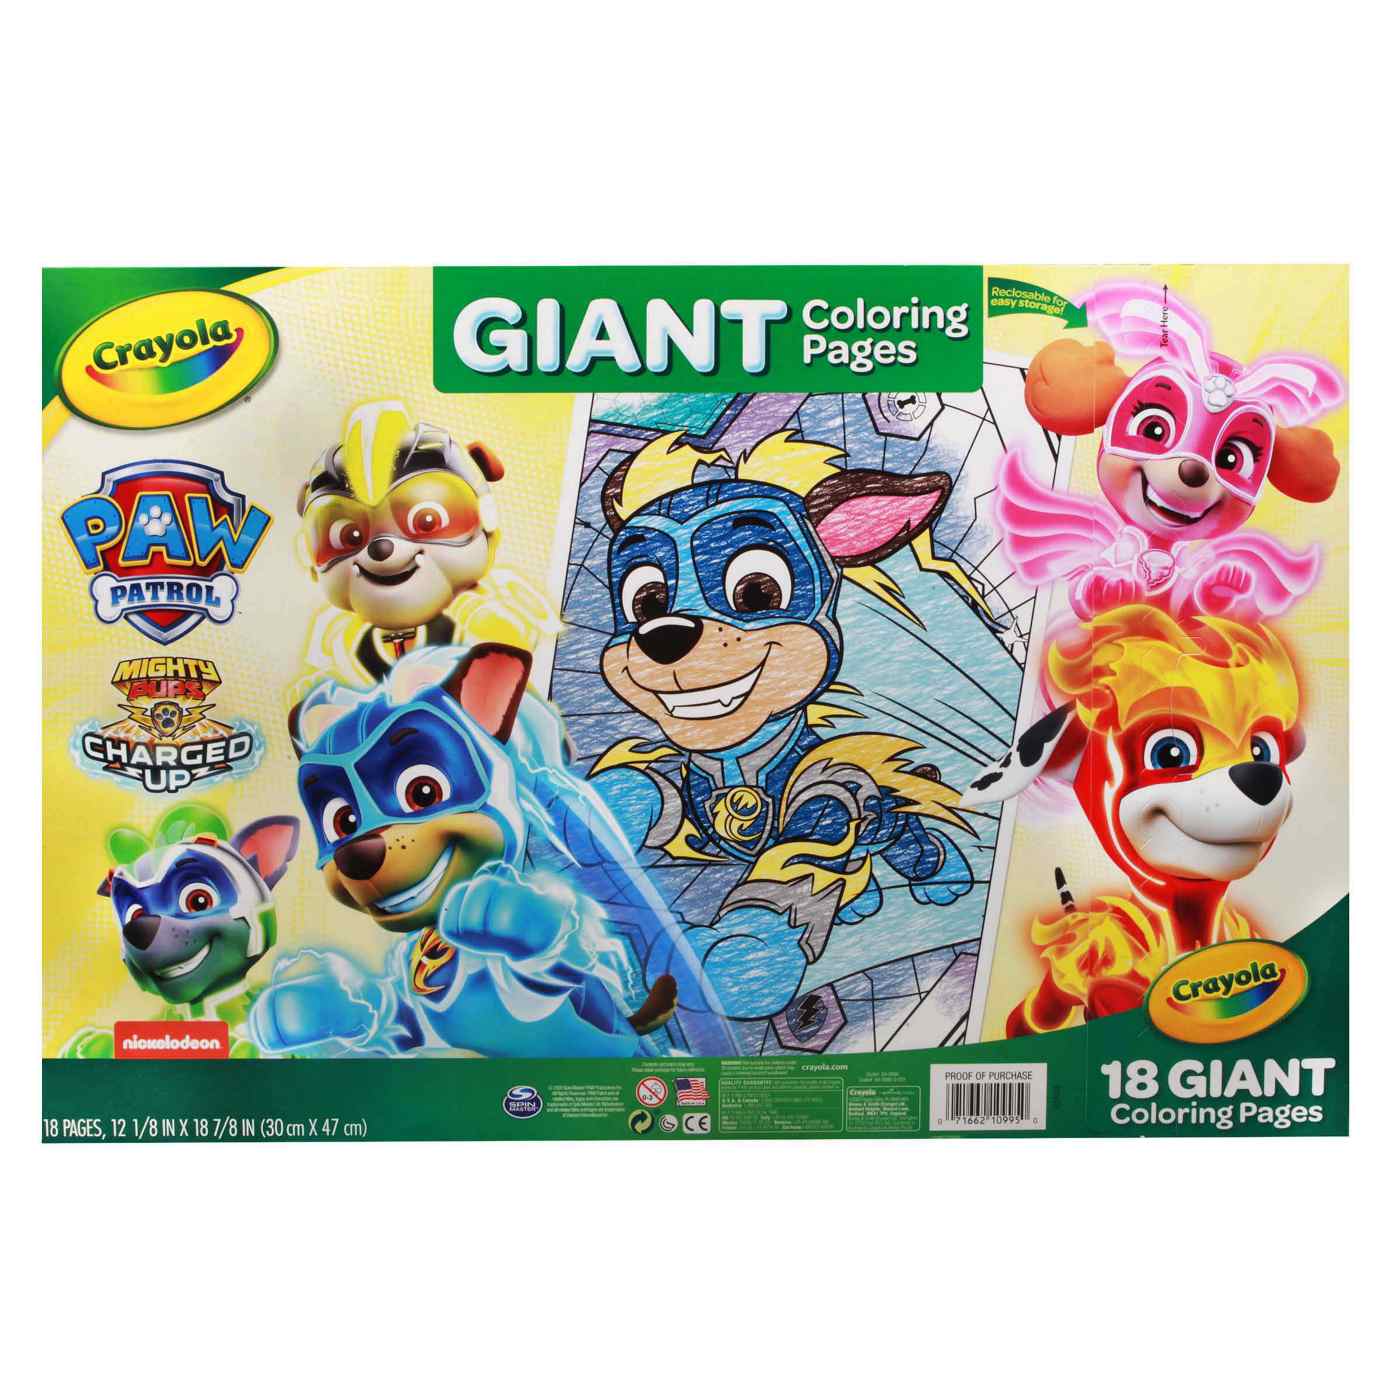 Crayola Paw Patrol Giant Coloring Pages; image 2 of 2